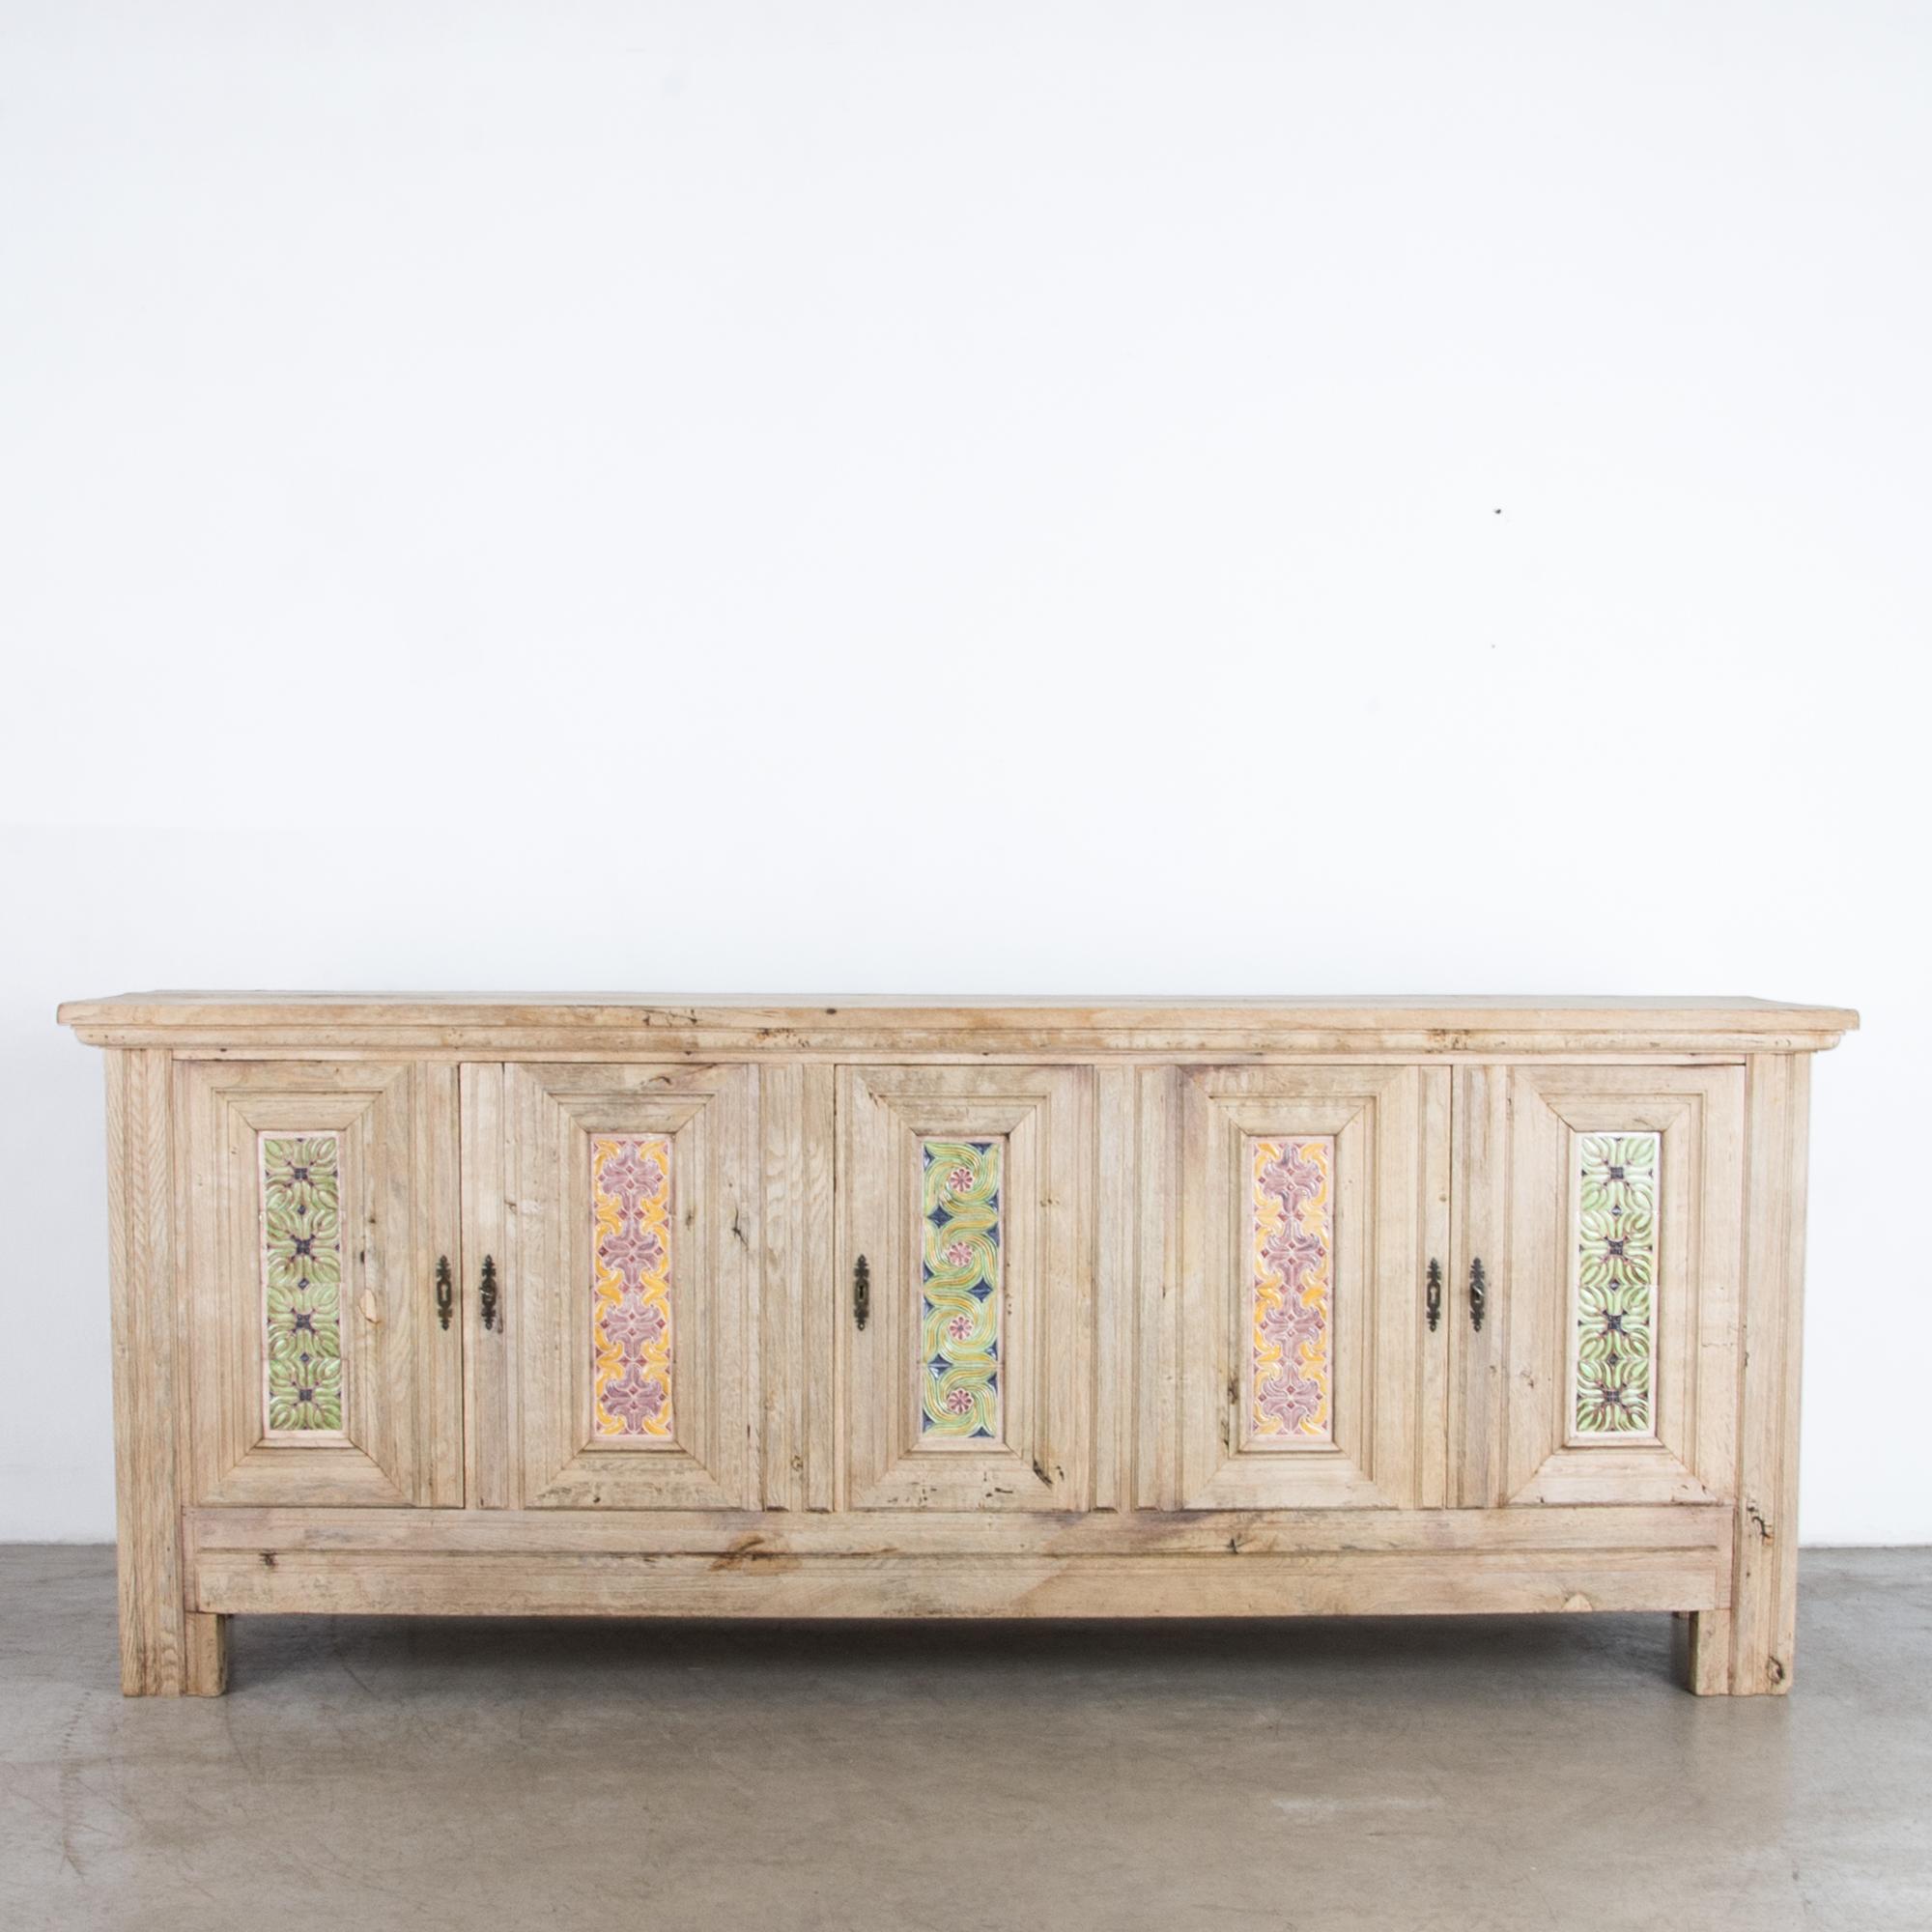 A bleached oak buffet from Belgium, circa 1940. Two pairs of double doors and one single door open onto an interior shelf. Glazed tiles in bright, symmetrical patterns decorate the door panels. The restored wood is light and natural, while the